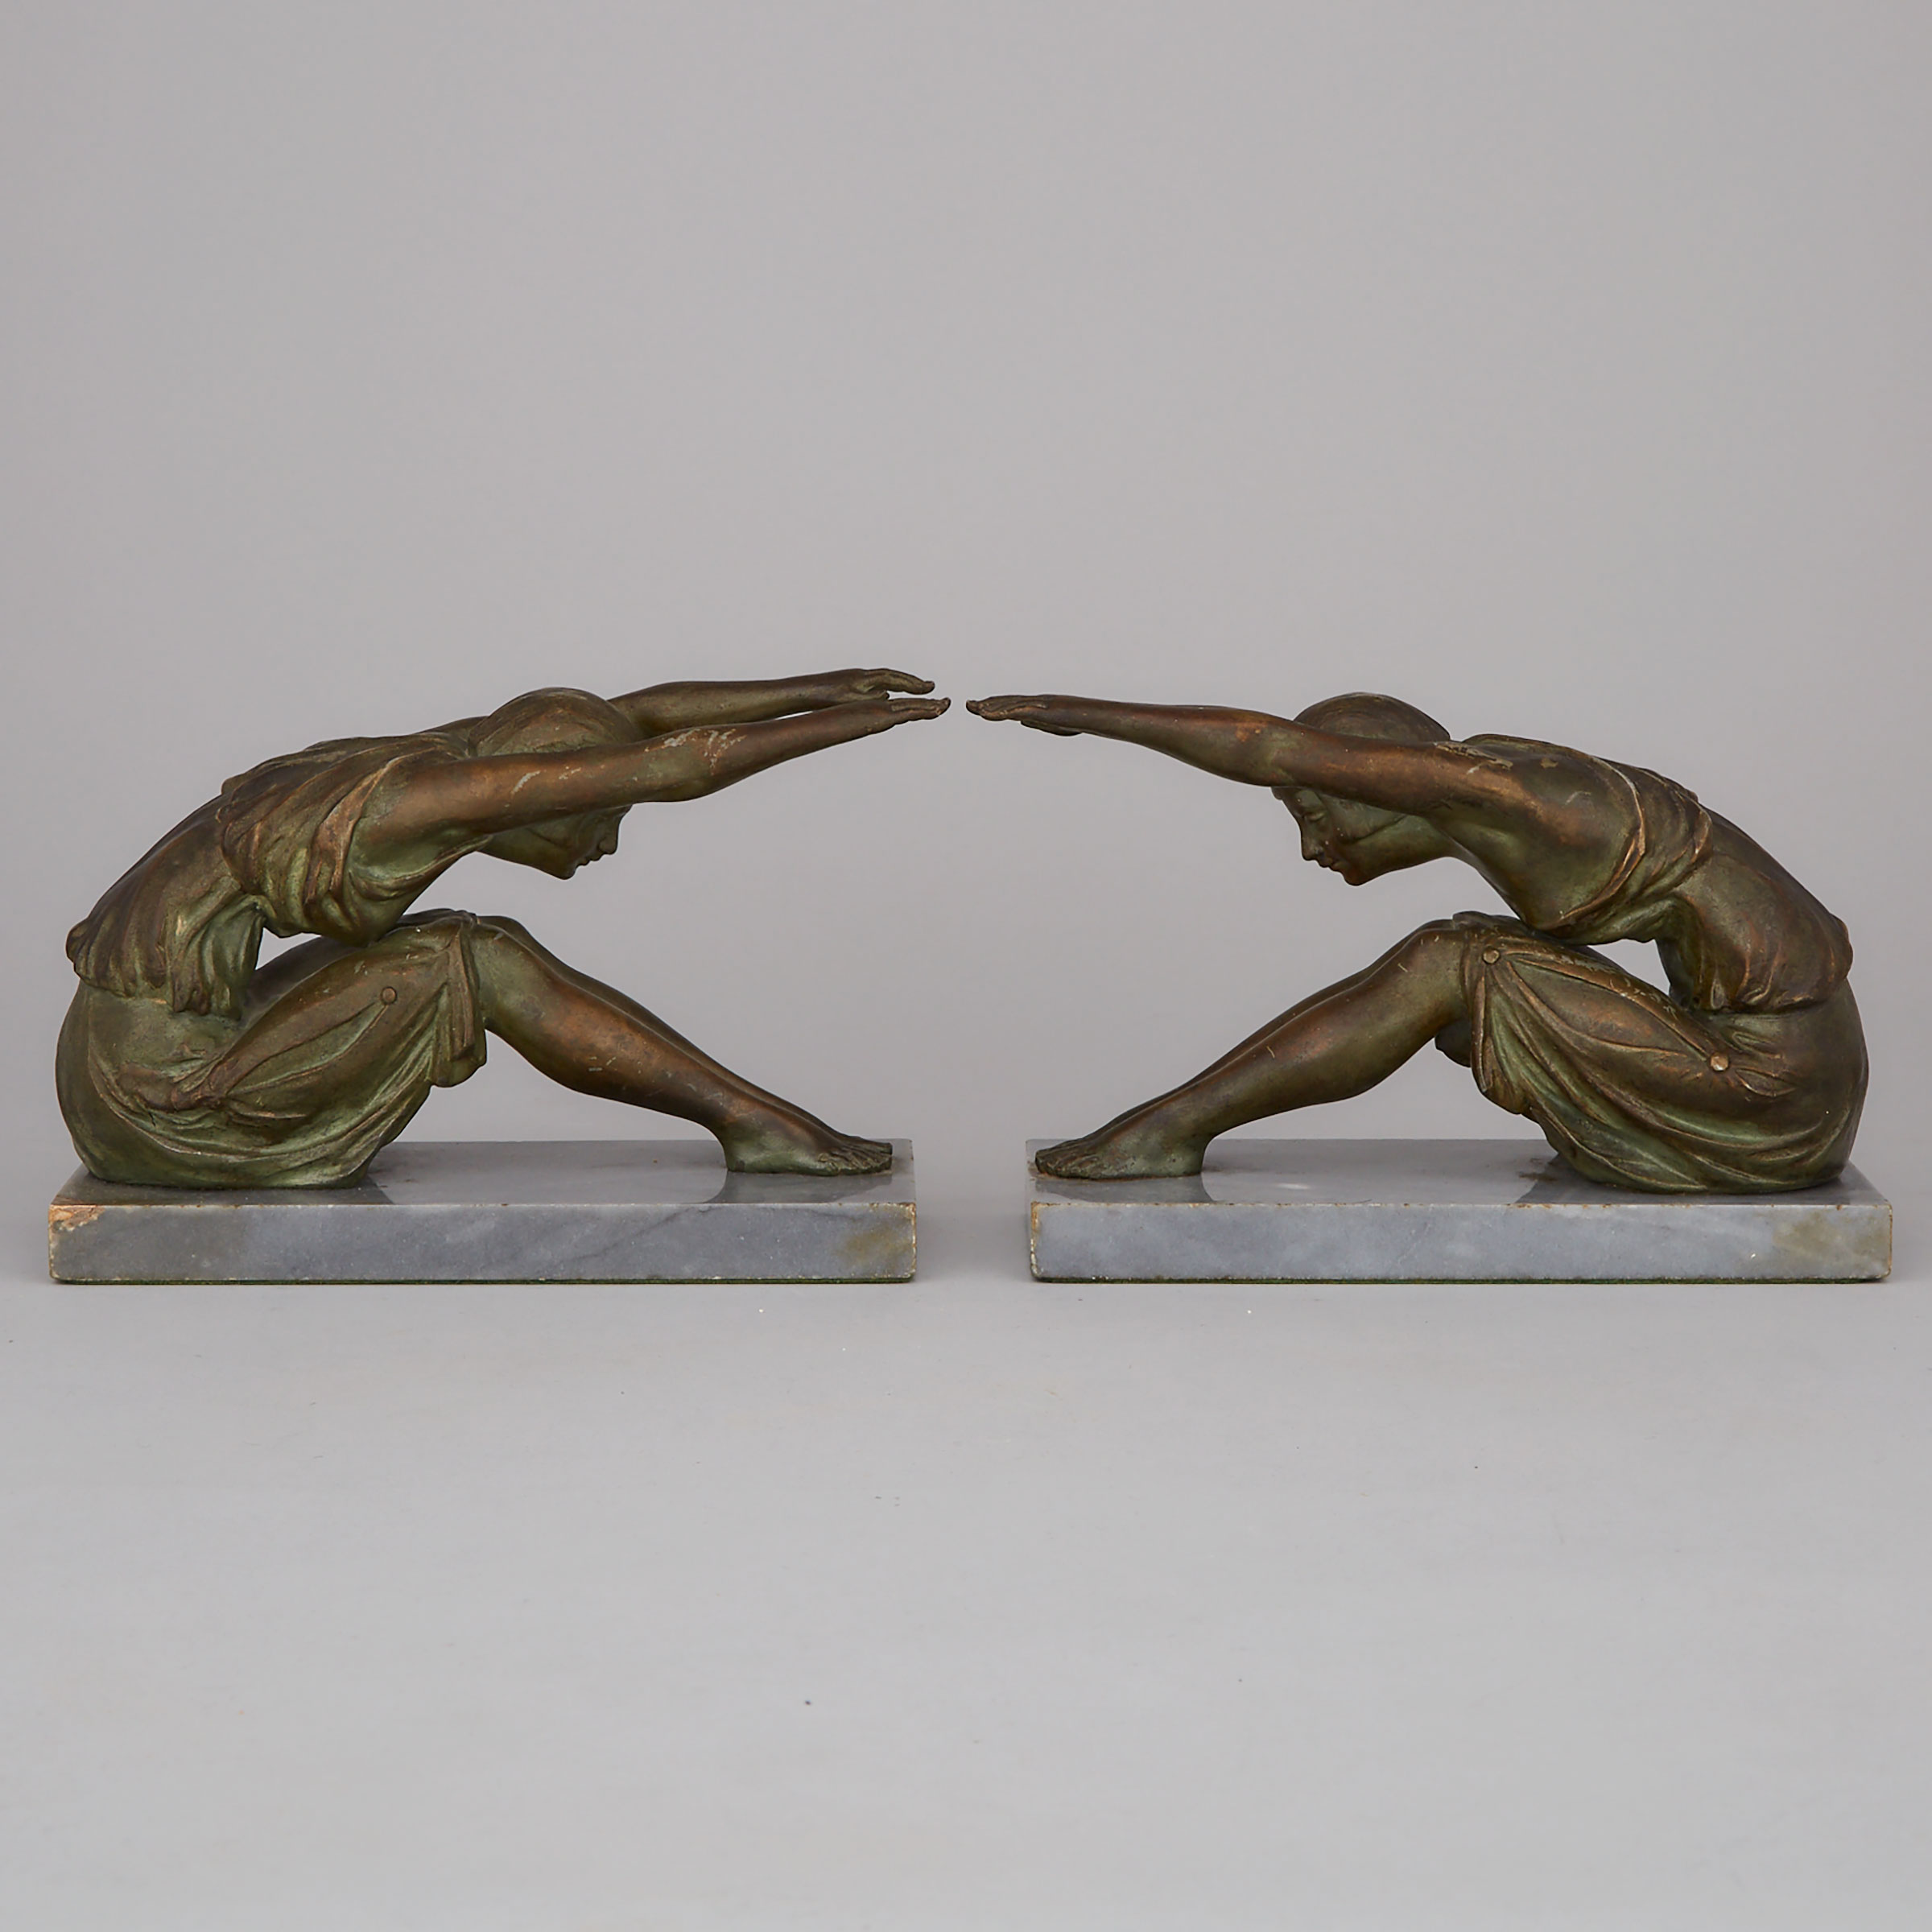 Pair of French Art Deco Patinated Metal Figural Bookends, c.1925